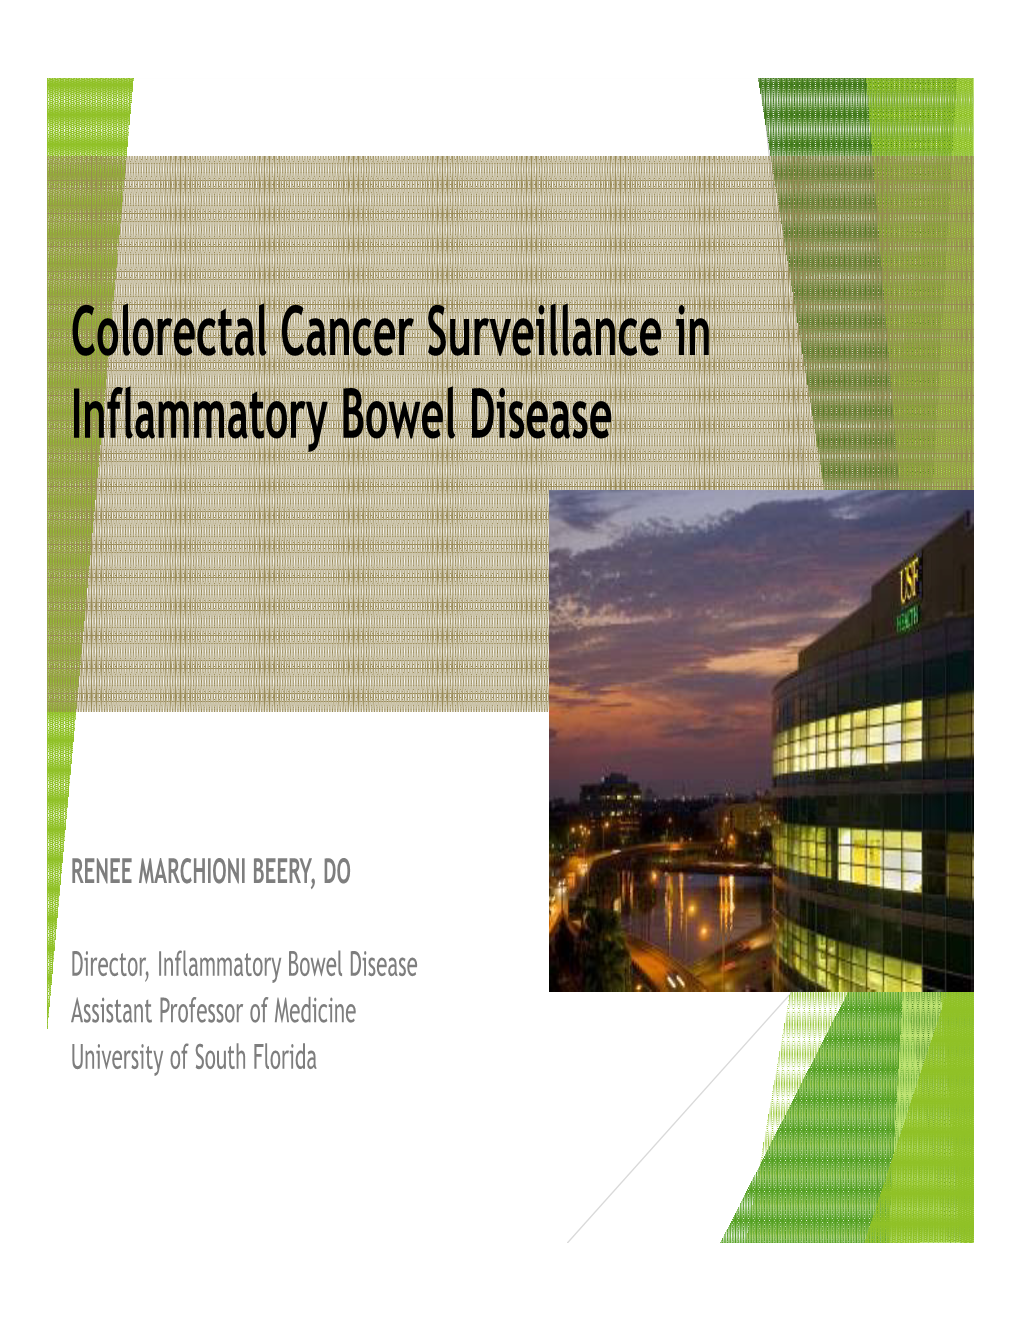 Colorectal Cancer Surveillance in Inflammatory Bowel Disease